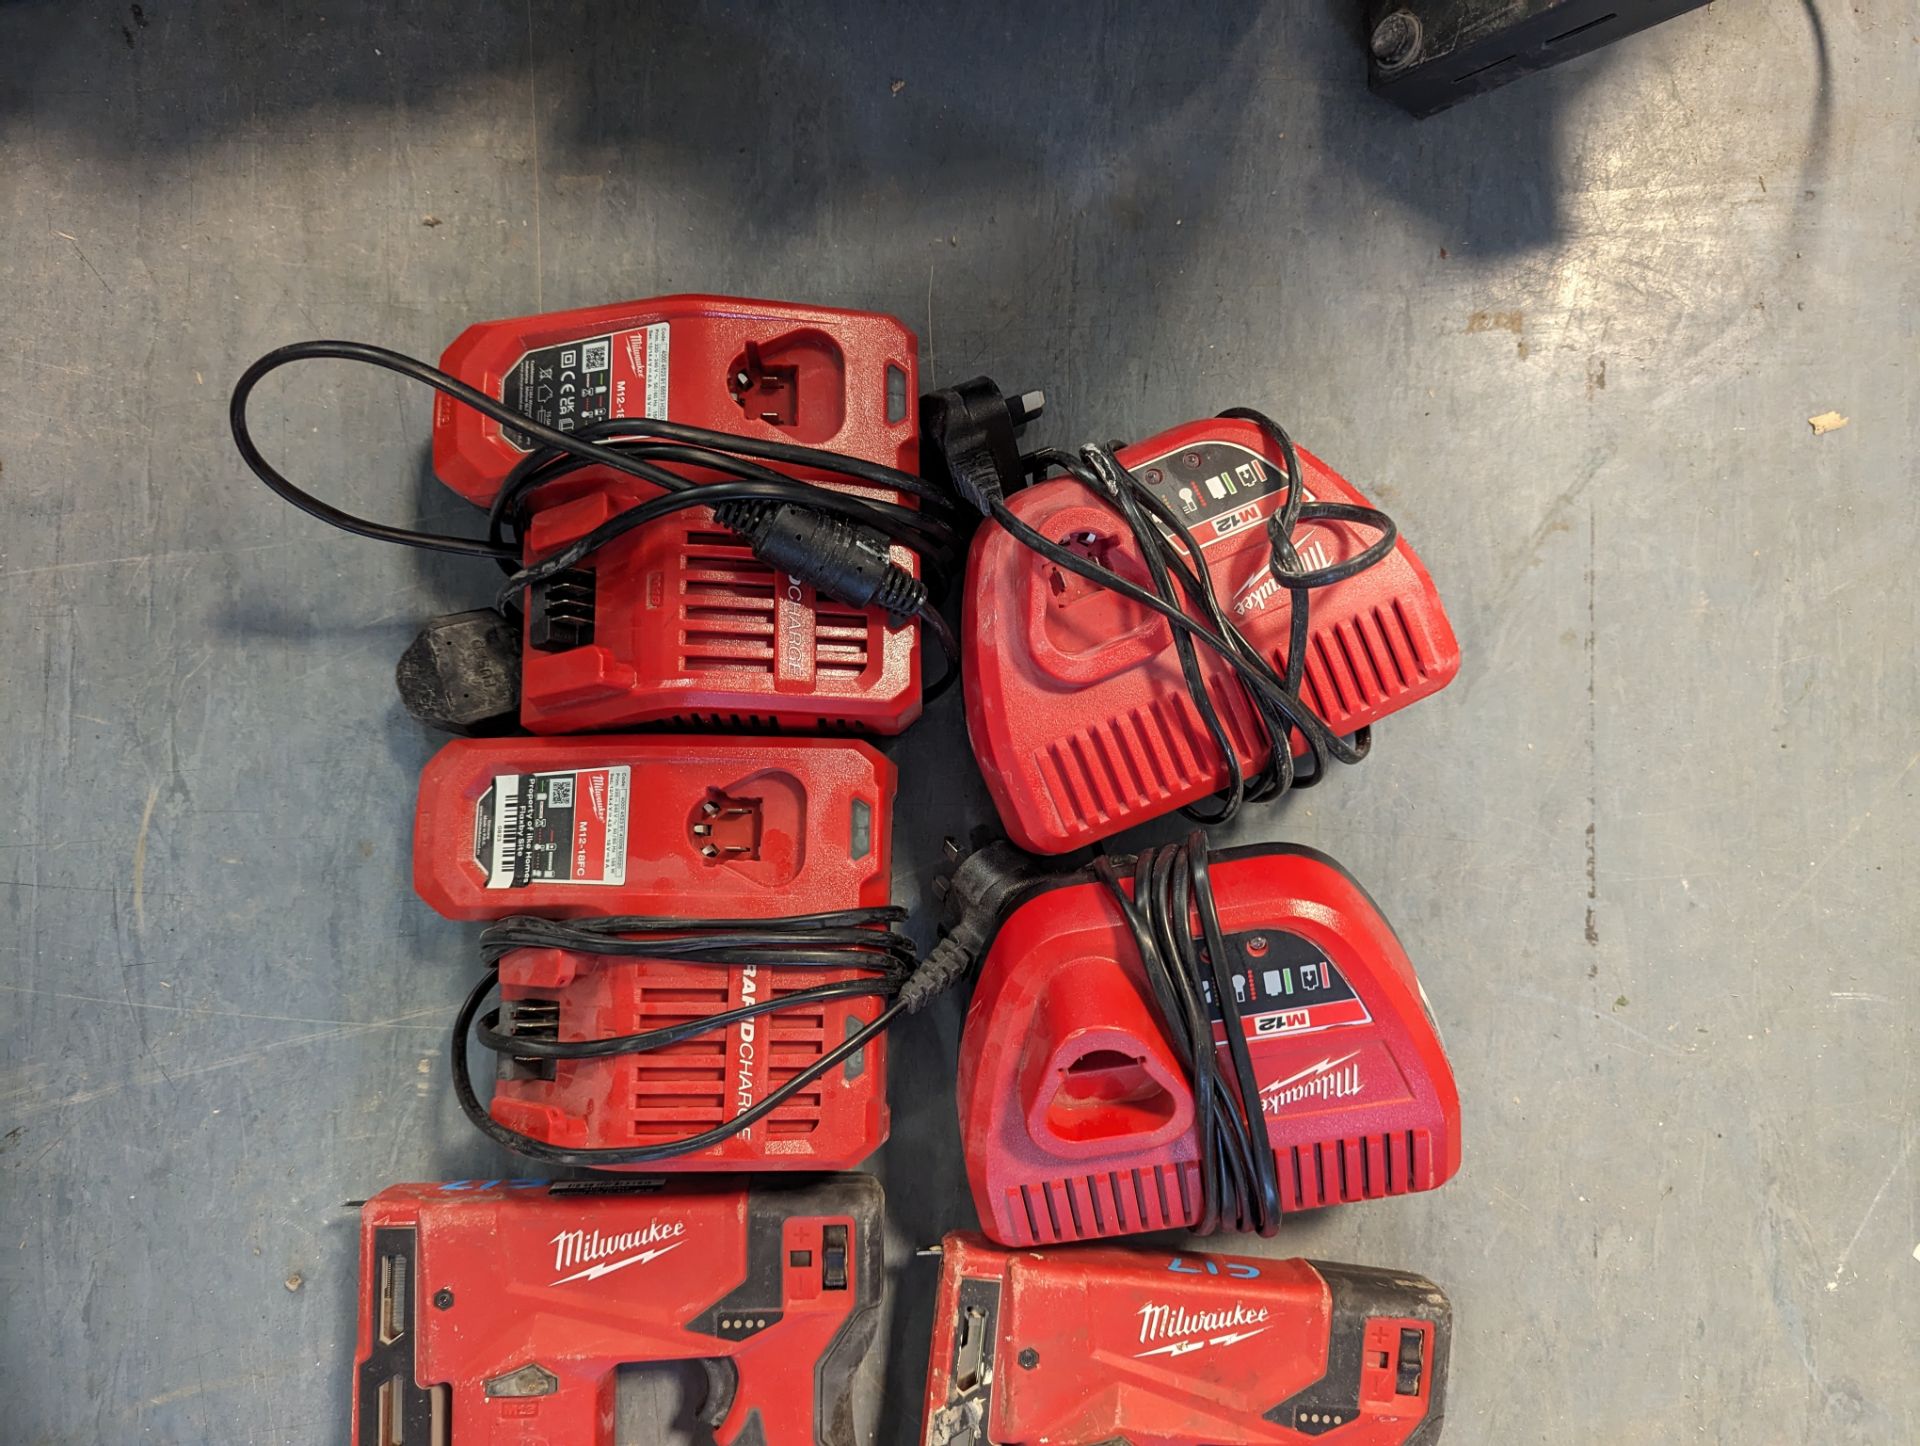 (10) Milwaiukee M12 BST Cordless Staple Guns with (4) Chargers and (8) Batteries - Image 3 of 3